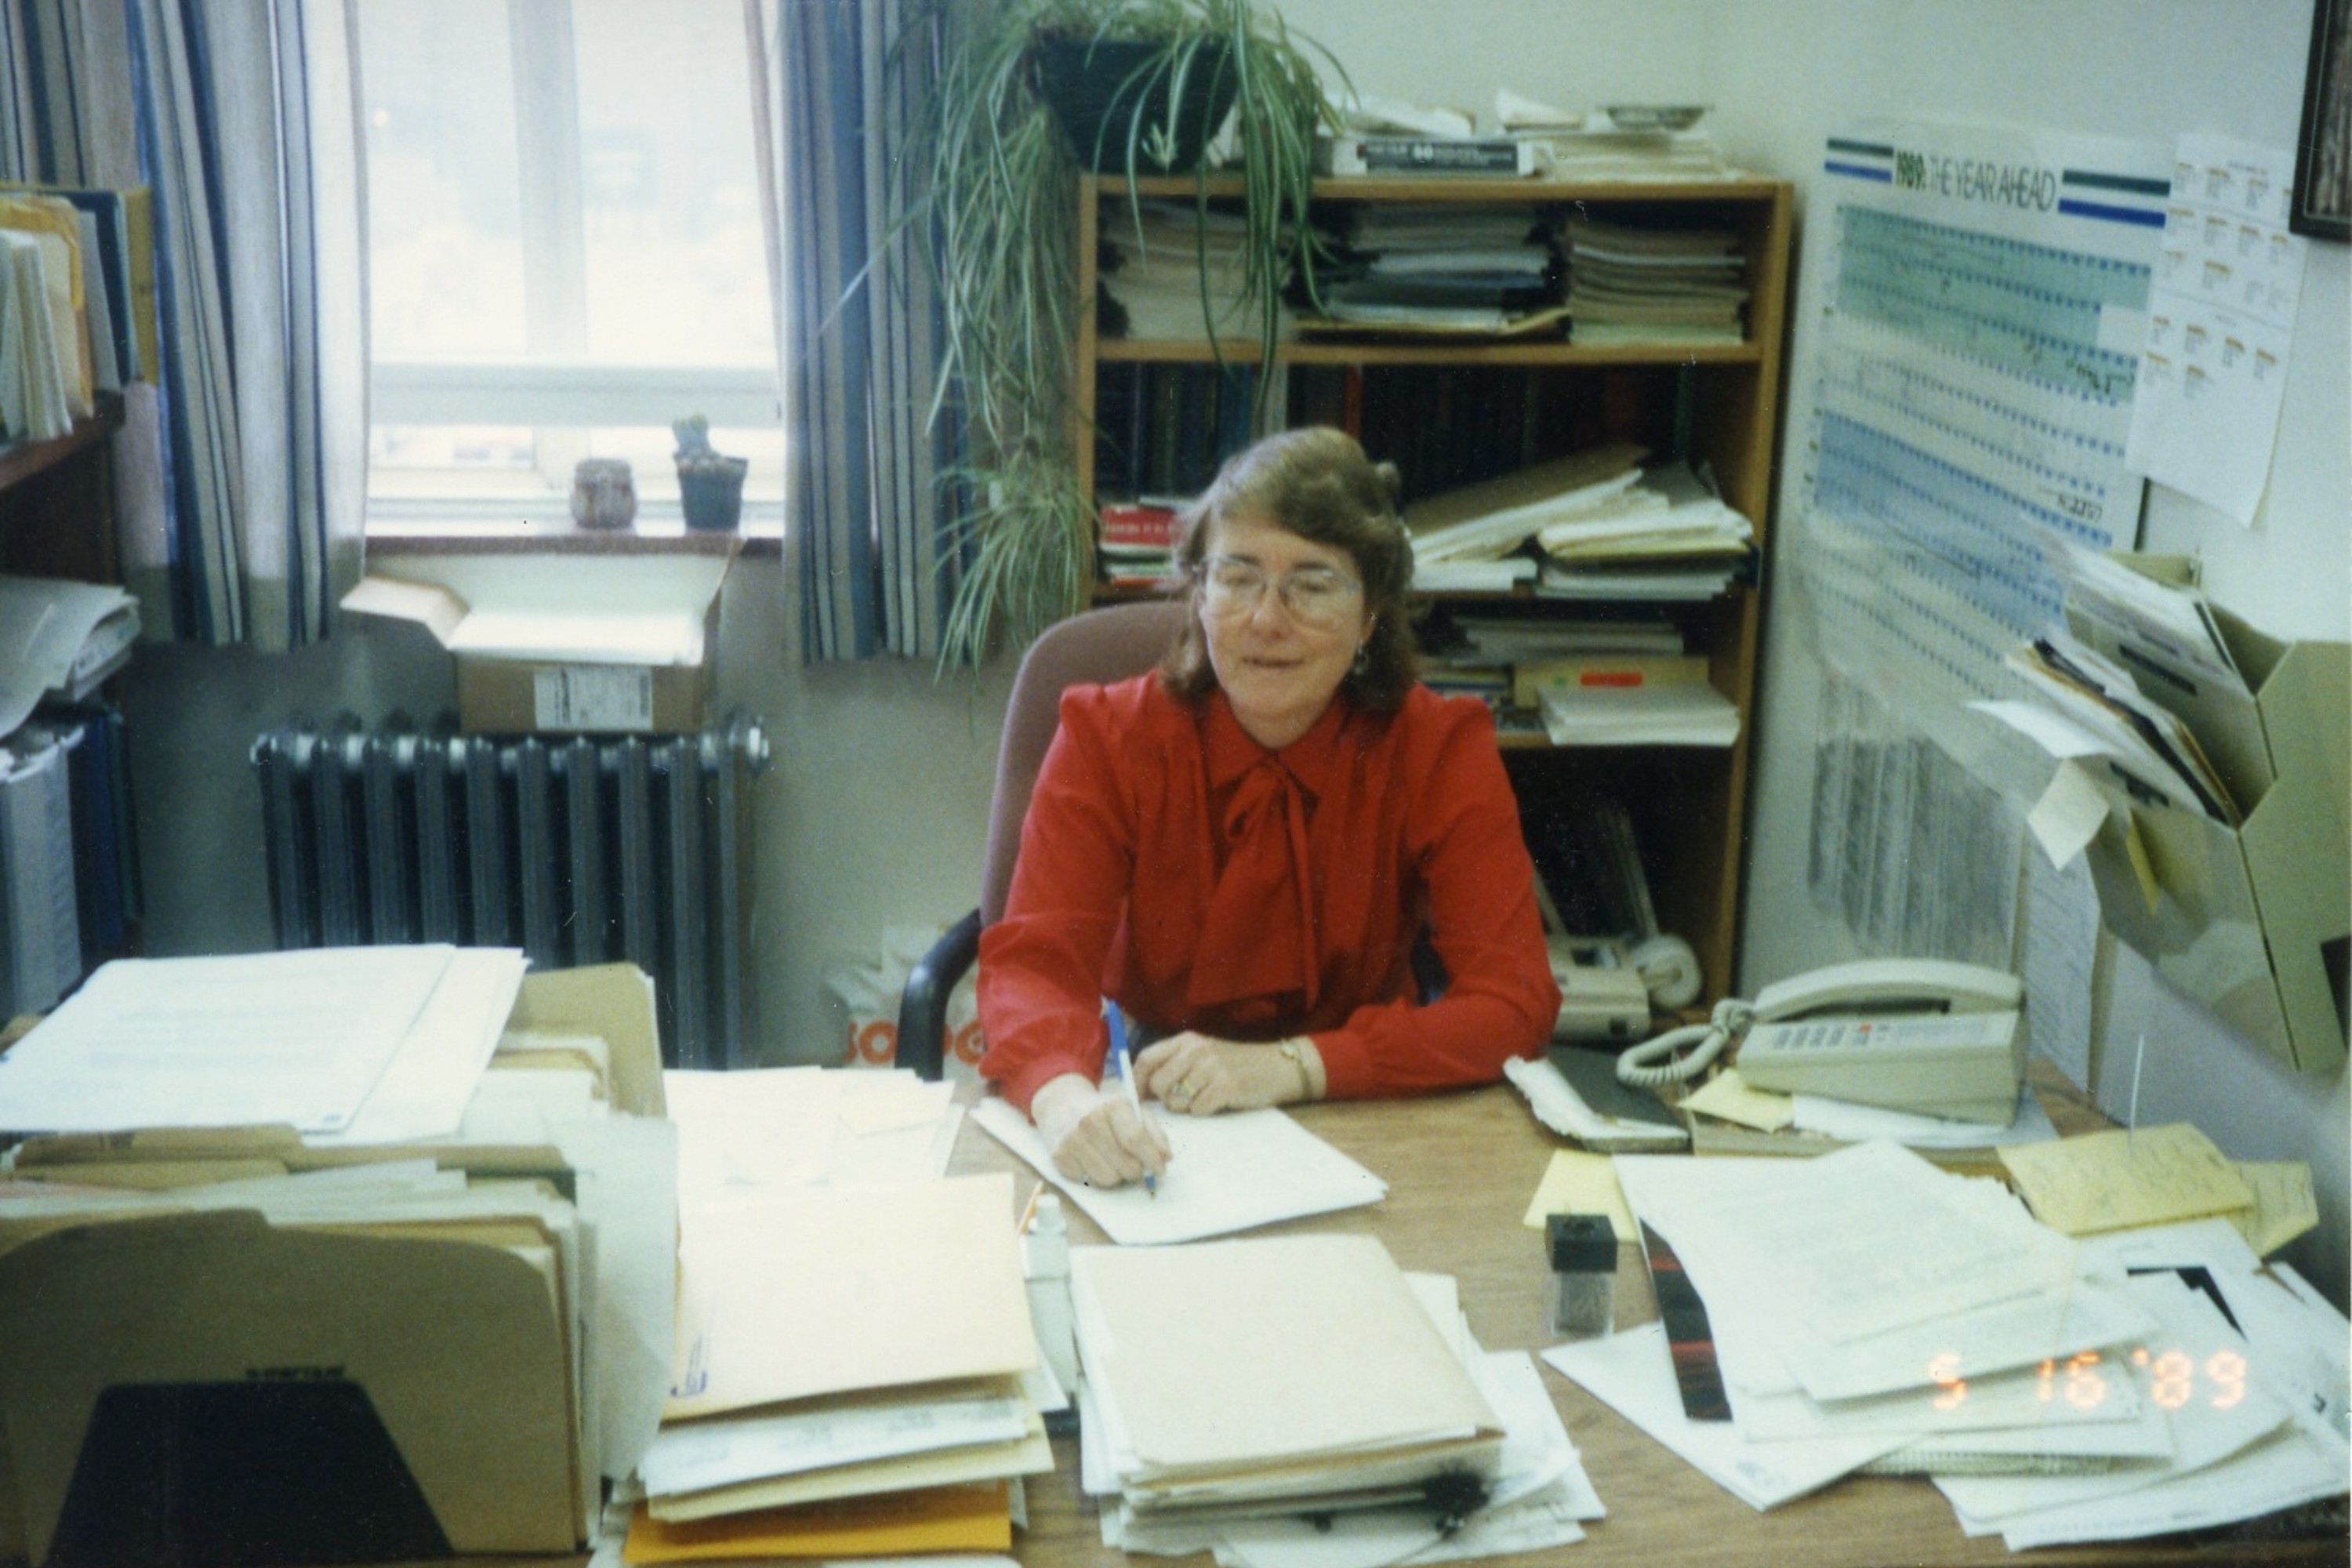 Professor Frize sitting at a desk in a small room, the desk is covered in stacks of paper and there are a set of shelves and a window behind her. The image is dated as 1989. 